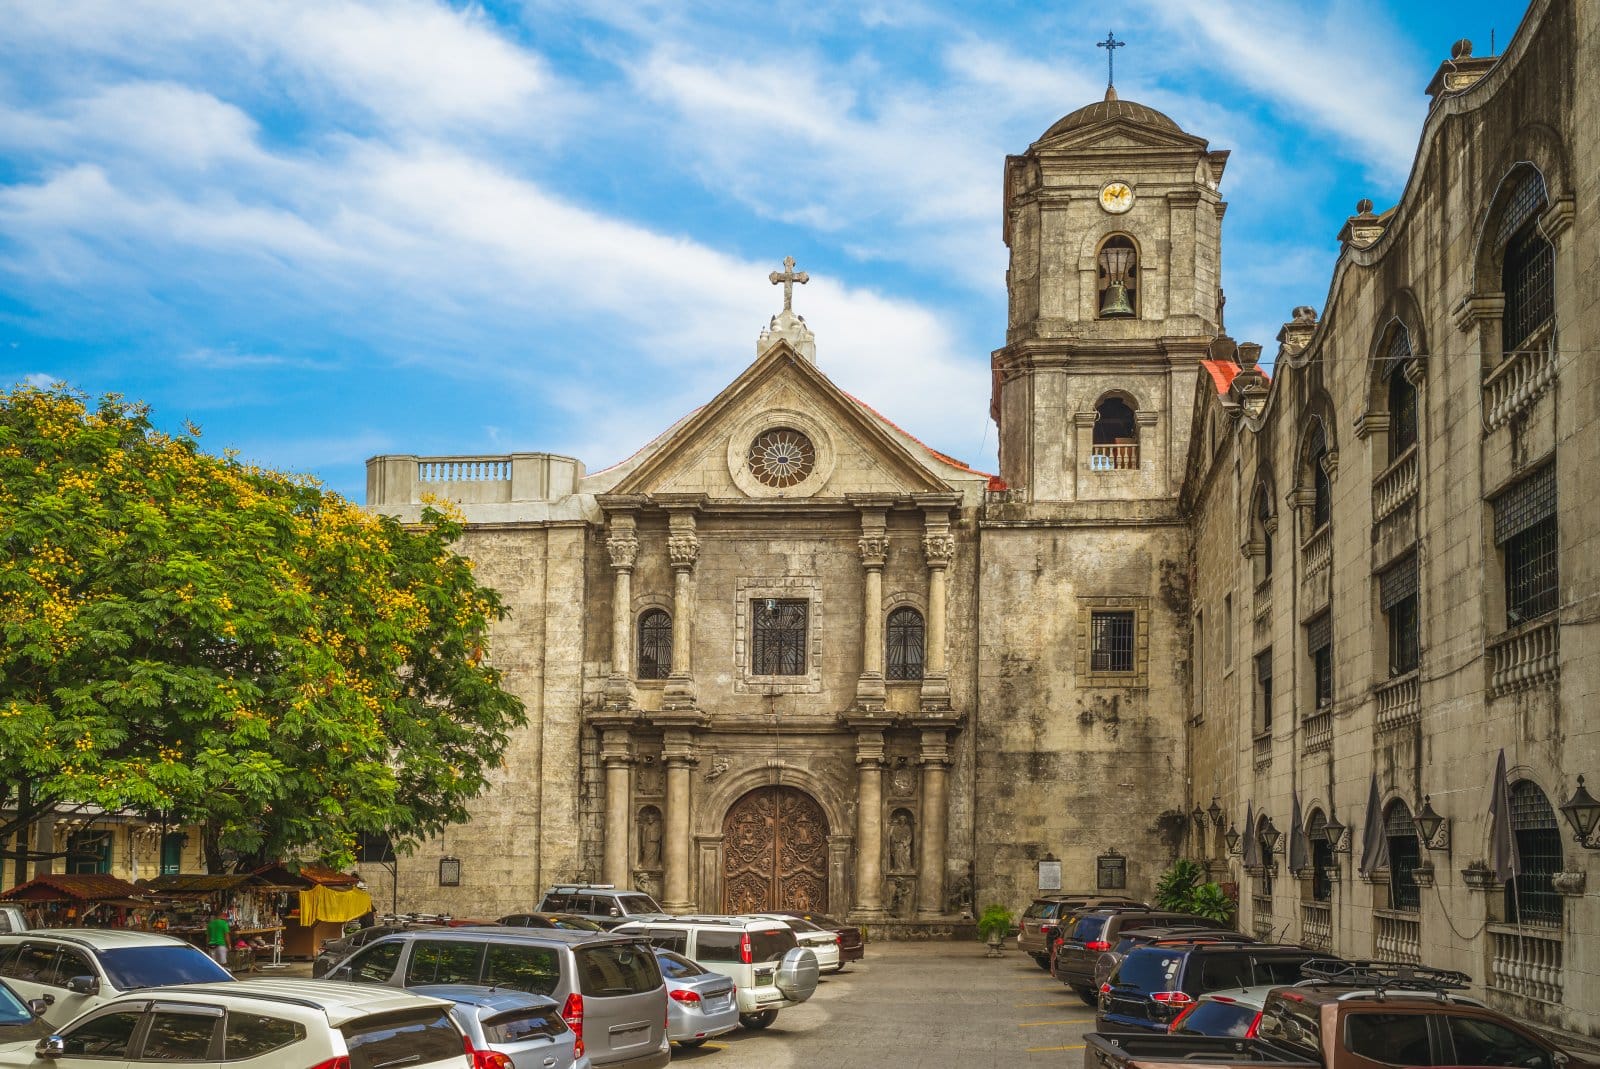 <p class="wp-caption-text">Image Credit: Shutterstock / Richie Chan</p>  <p><span>San Agustin Church, located within the historic walls of Intramuros in Manila, Philippines, is the oldest stone church in the country, with its construction completed in 1607. This architectural feat is a prime example of Spanish Baroque architecture, reflecting the Philippines’ colonial history and the significant influence of Spanish culture and religion.</span></p> <p><span>Declared a UNESCO World Heritage Site in 1993 as part of the Baroque Churches of the Philippines, San Agustin Church boasts a richly decorated interior, including intricately carved doors, trompe-l’oeil ceilings, and a magnificent altar. The church has survived numerous natural disasters and wars, notably standing firm through the destructive Battle of Manila in 1945, which left much of Intramuros in ruins.</span></p> <p><span>The church also houses a significant collection of religious art and artifacts in its museum, including ecclesiastical vestments, ancient manuscripts, and religious statuary, offering insights into the Philippines’ religious and cultural heritage. The adjacent monastery, now the site of the San Agustin Museum, further enriches the visitor experience with its cloisters, gardens, and extensive art collection.</span></p> <p><span>San Agustin Church’s historical and cultural significance and architectural beauty make it a vital landmark in the Philippines’ historical landscape and a must-visit destination for those interested in the country’s colonial past and religious traditions.</span></p>